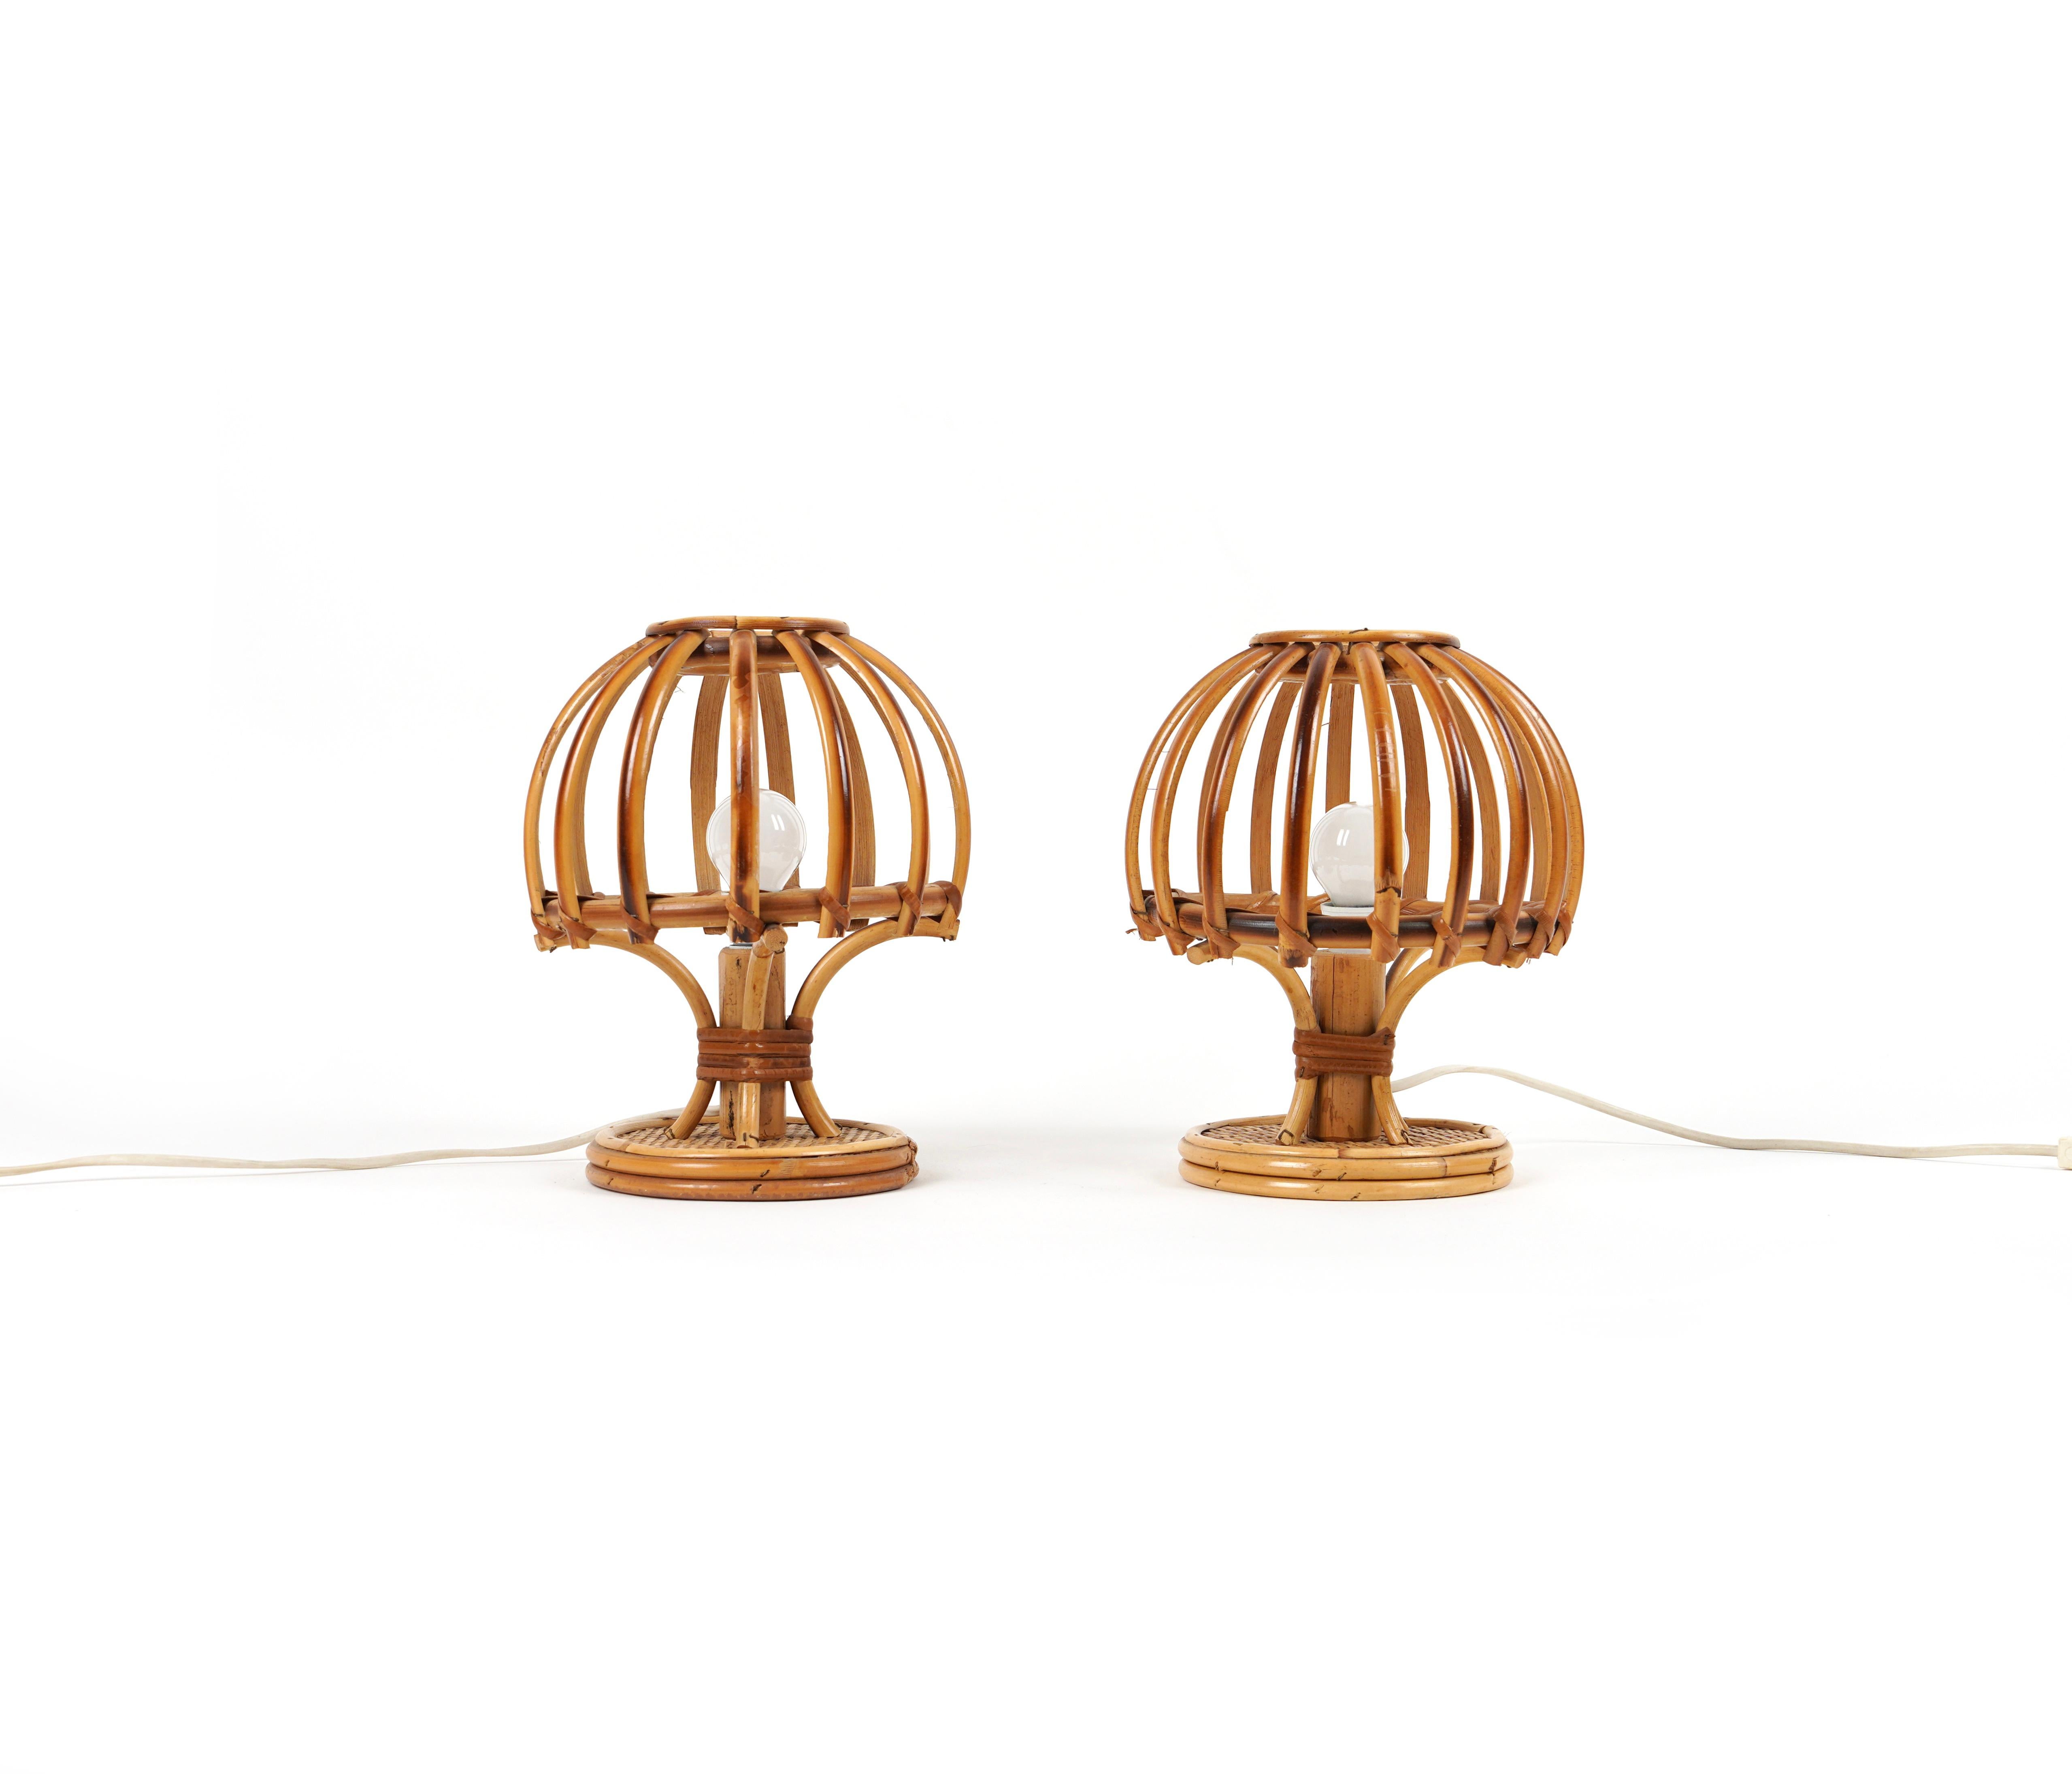 Italian Midcentury Bamboo and Rattan Pair of Table Lamps Louis Sognot Style Italy, 1970s For Sale